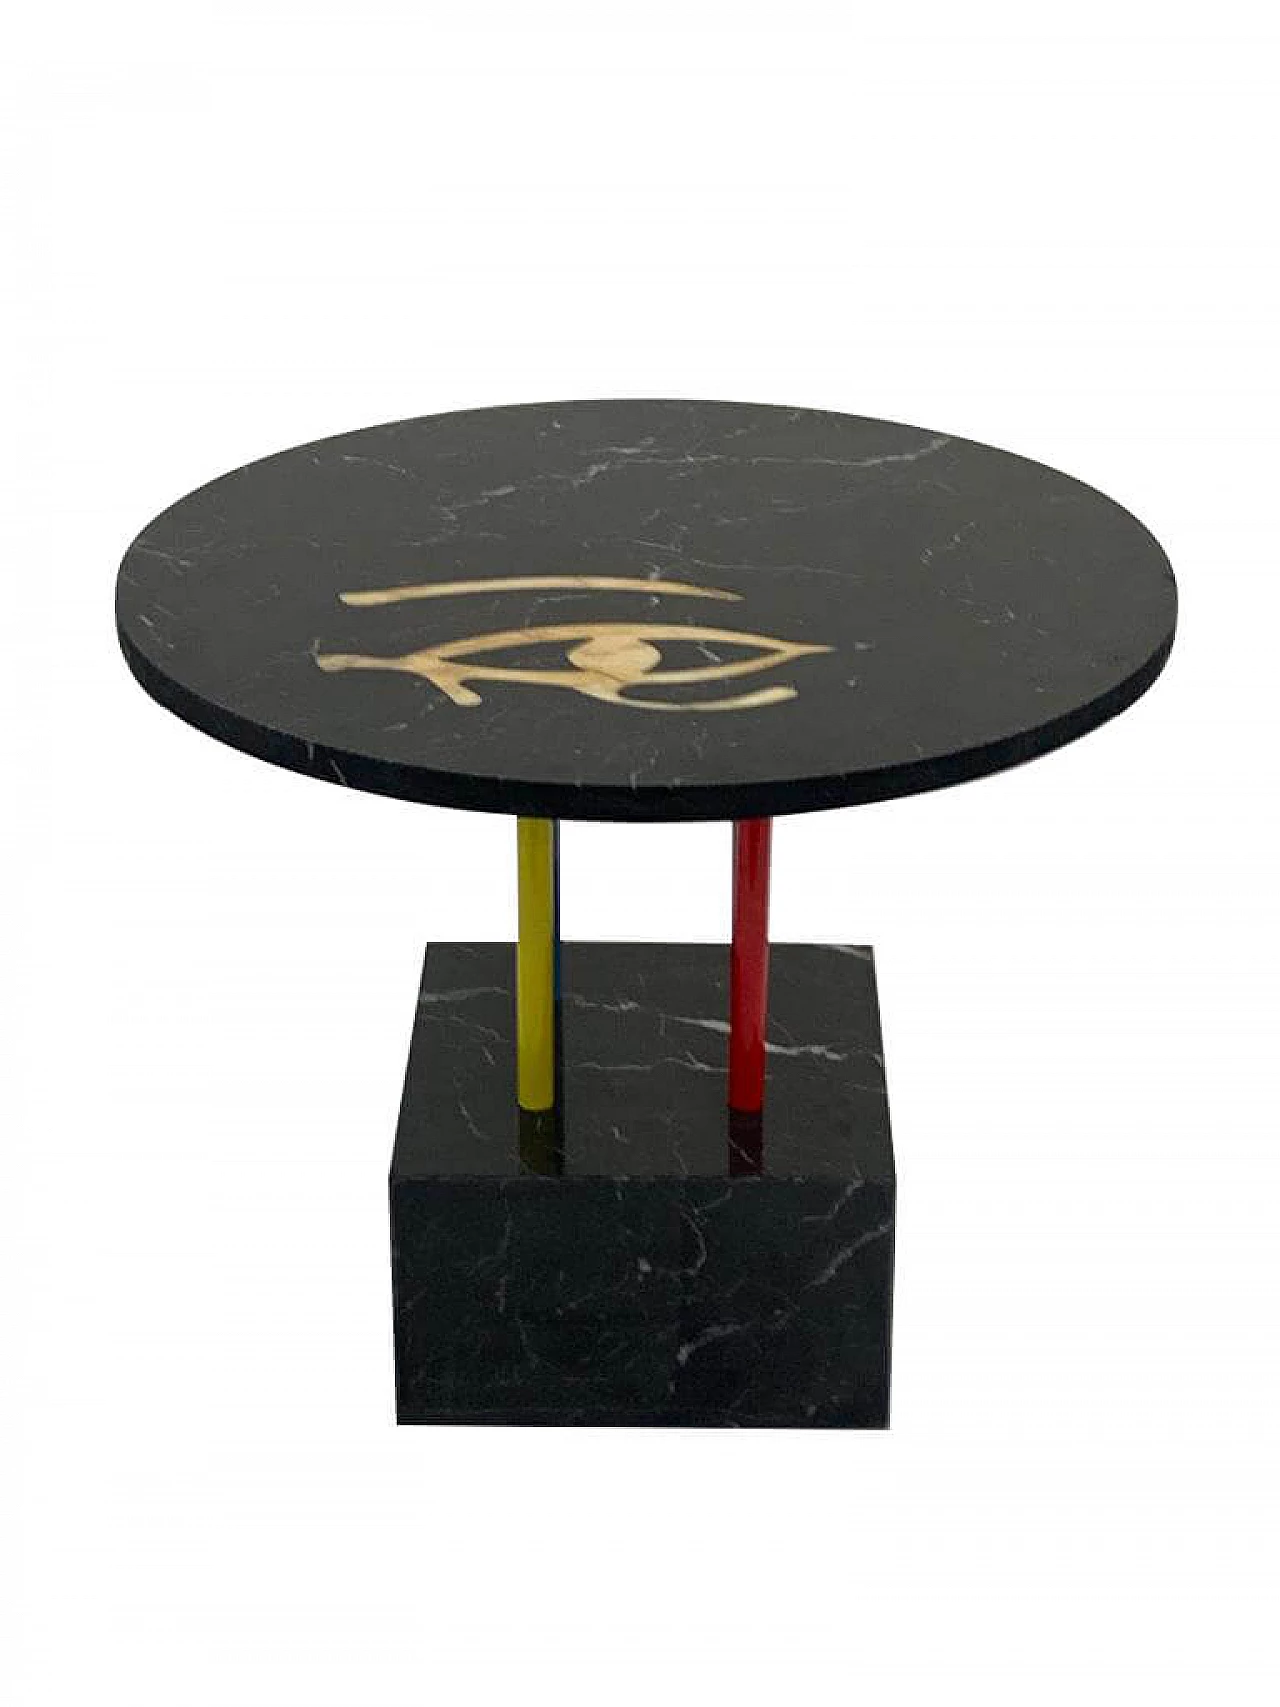 Cleto Munari Horus coffee table, unique piece with inlaid marble 1312160